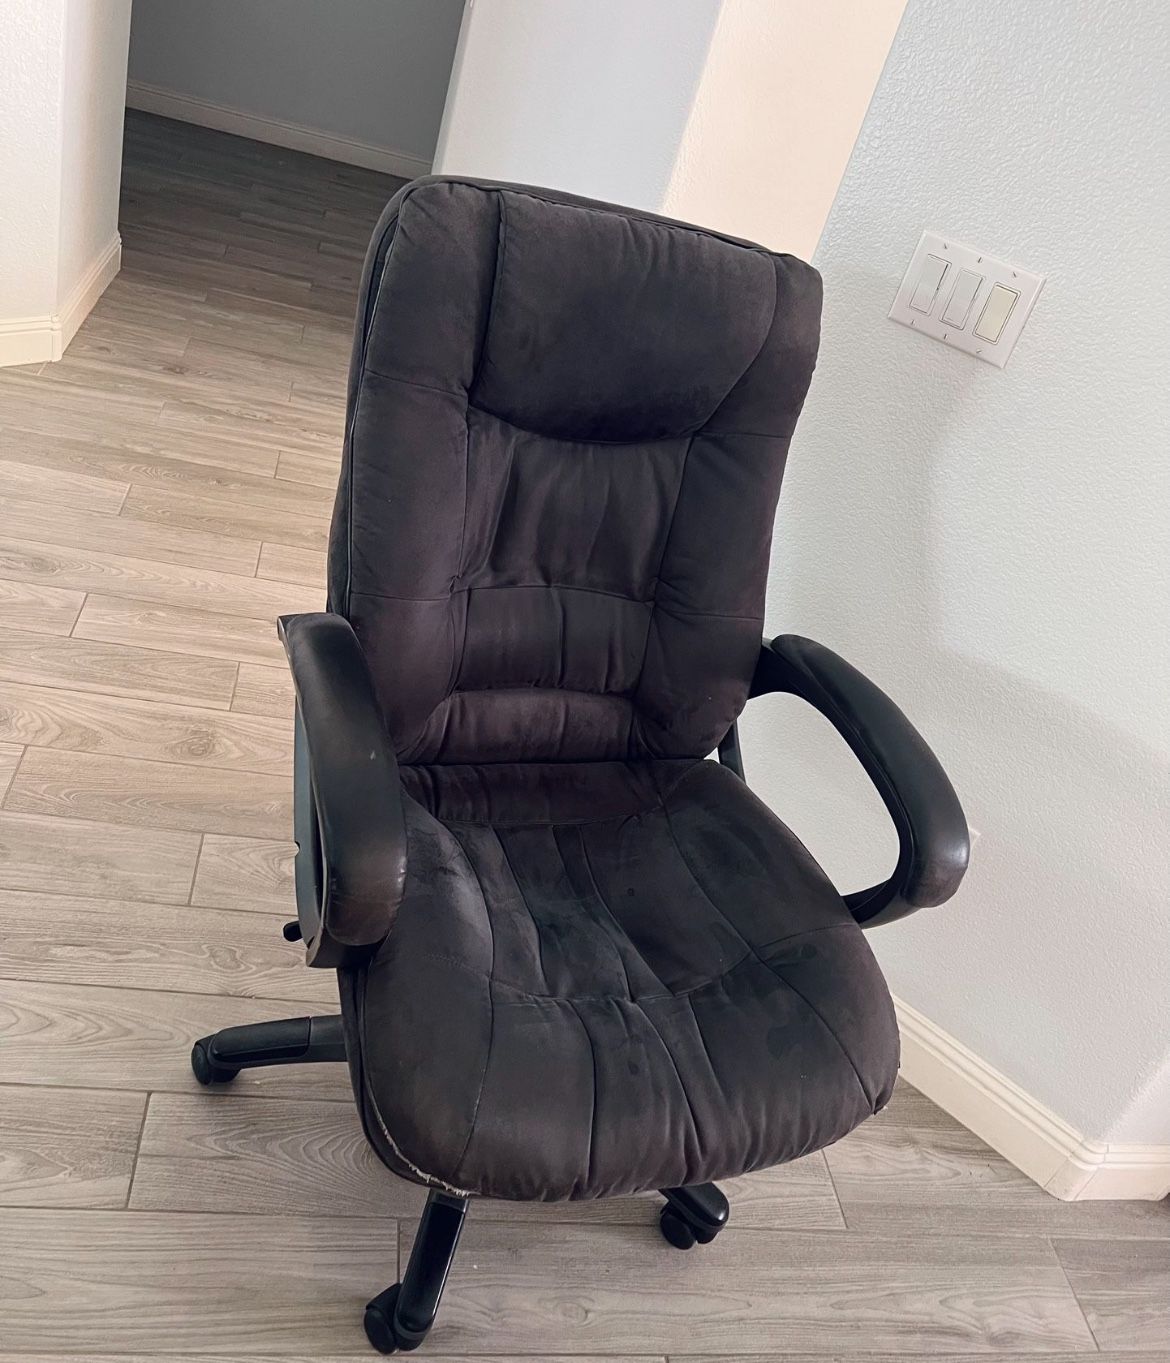 FREE office Chair 